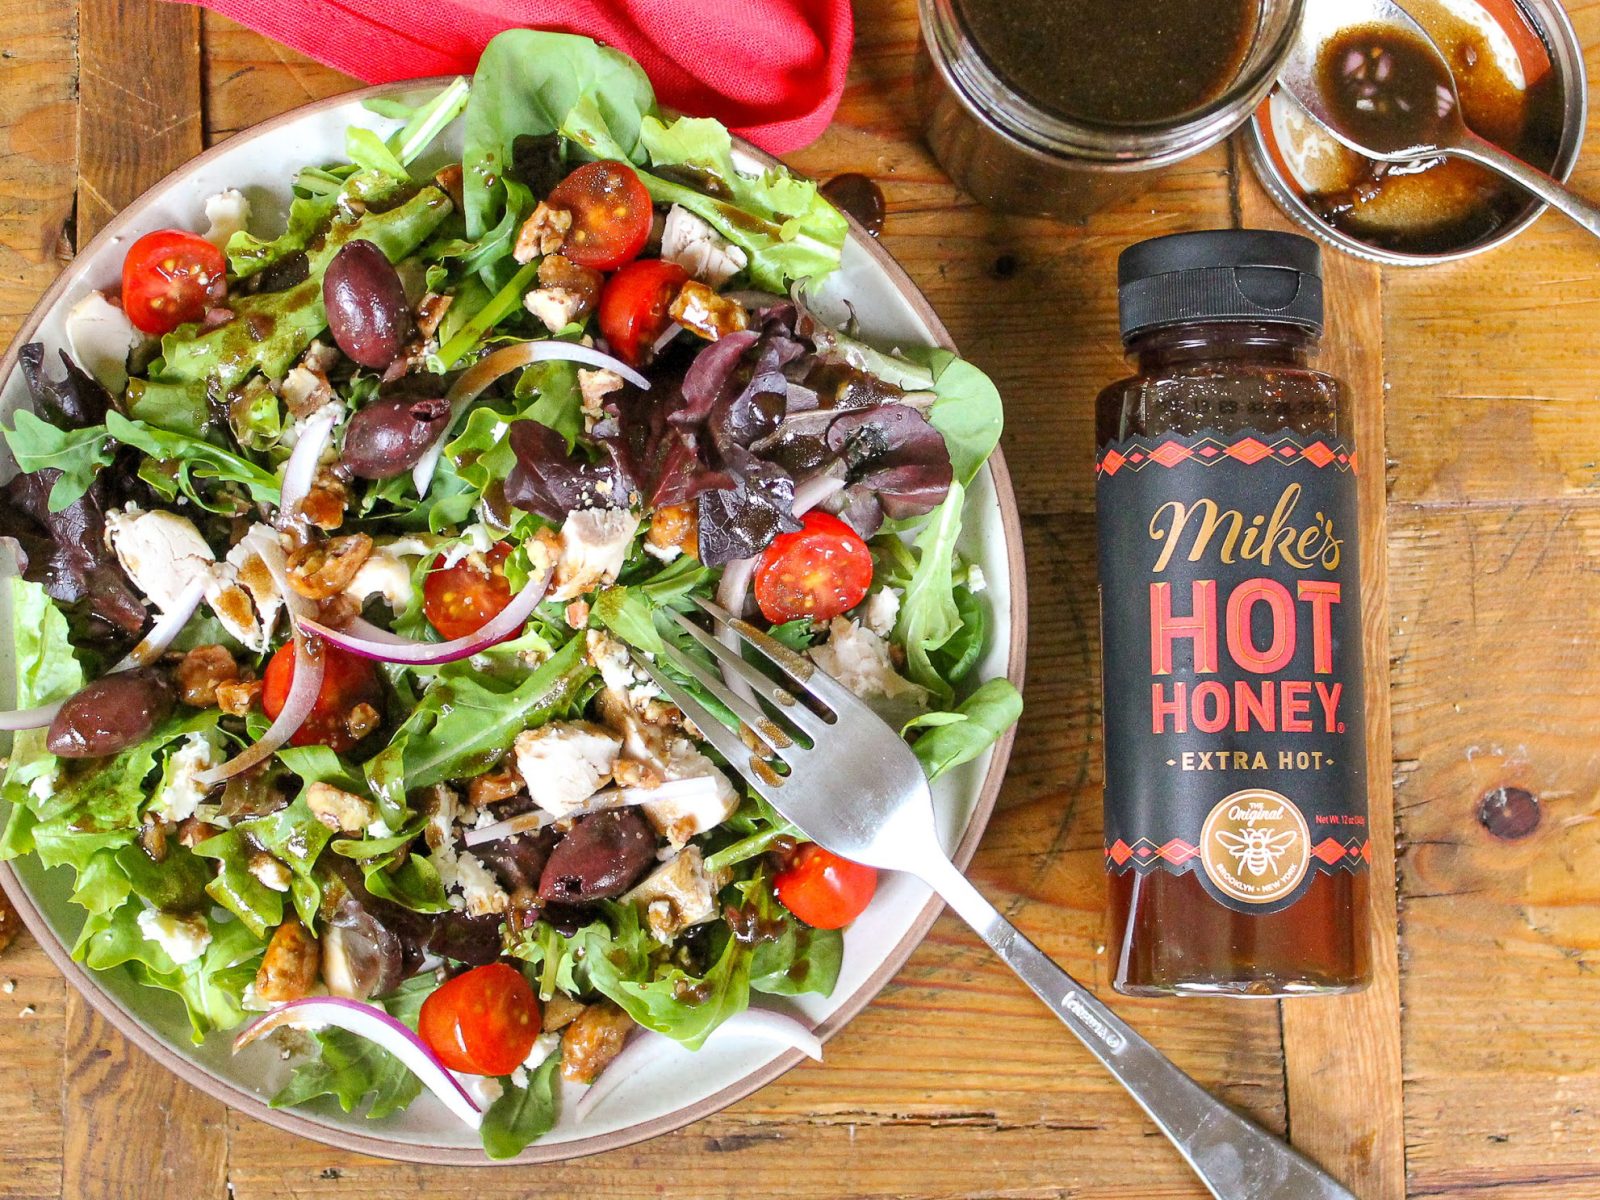 Grab A Bottle Of Mike’s Hot Honey – Extra Hot For All Your Favorite Summer Meals